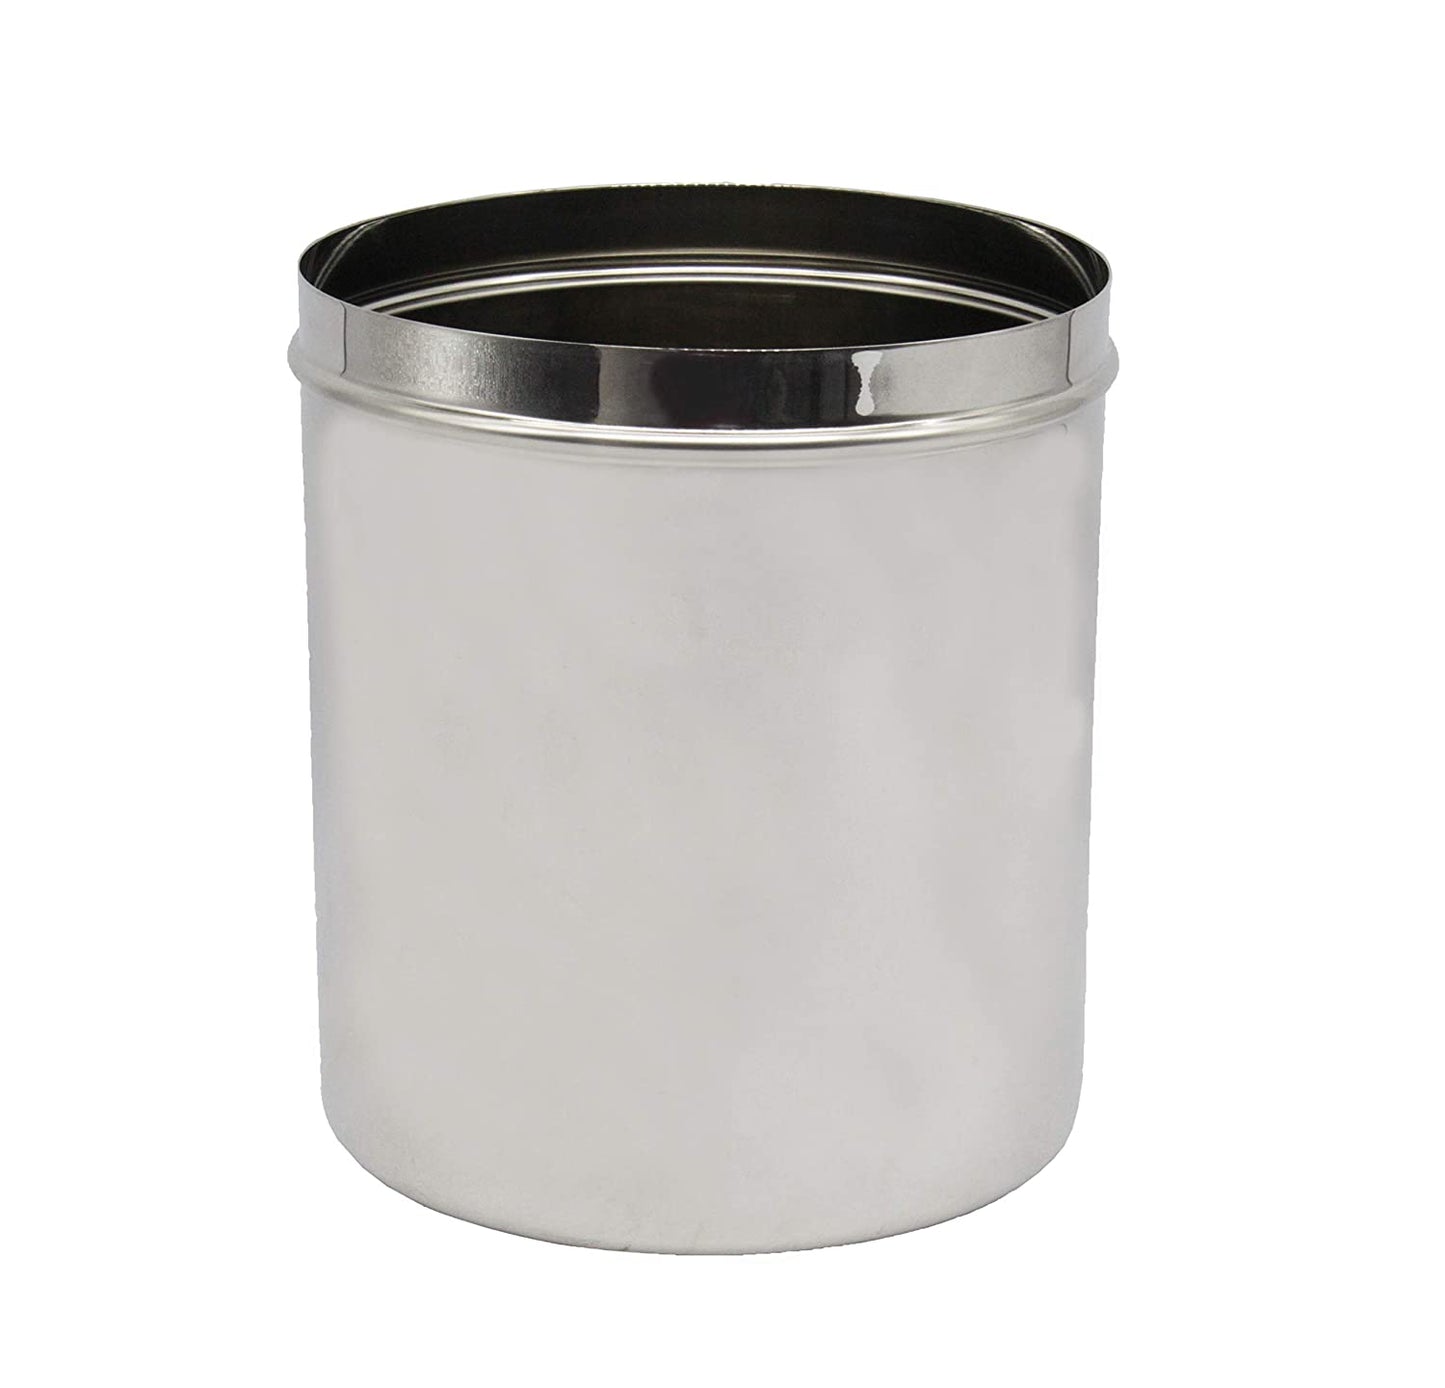 Stainless Steel Container | Canister | Deep Dabba Set of 5 Pcs (10.5cm,12.5cm,13.5cm,14.5cm,15.5cm)